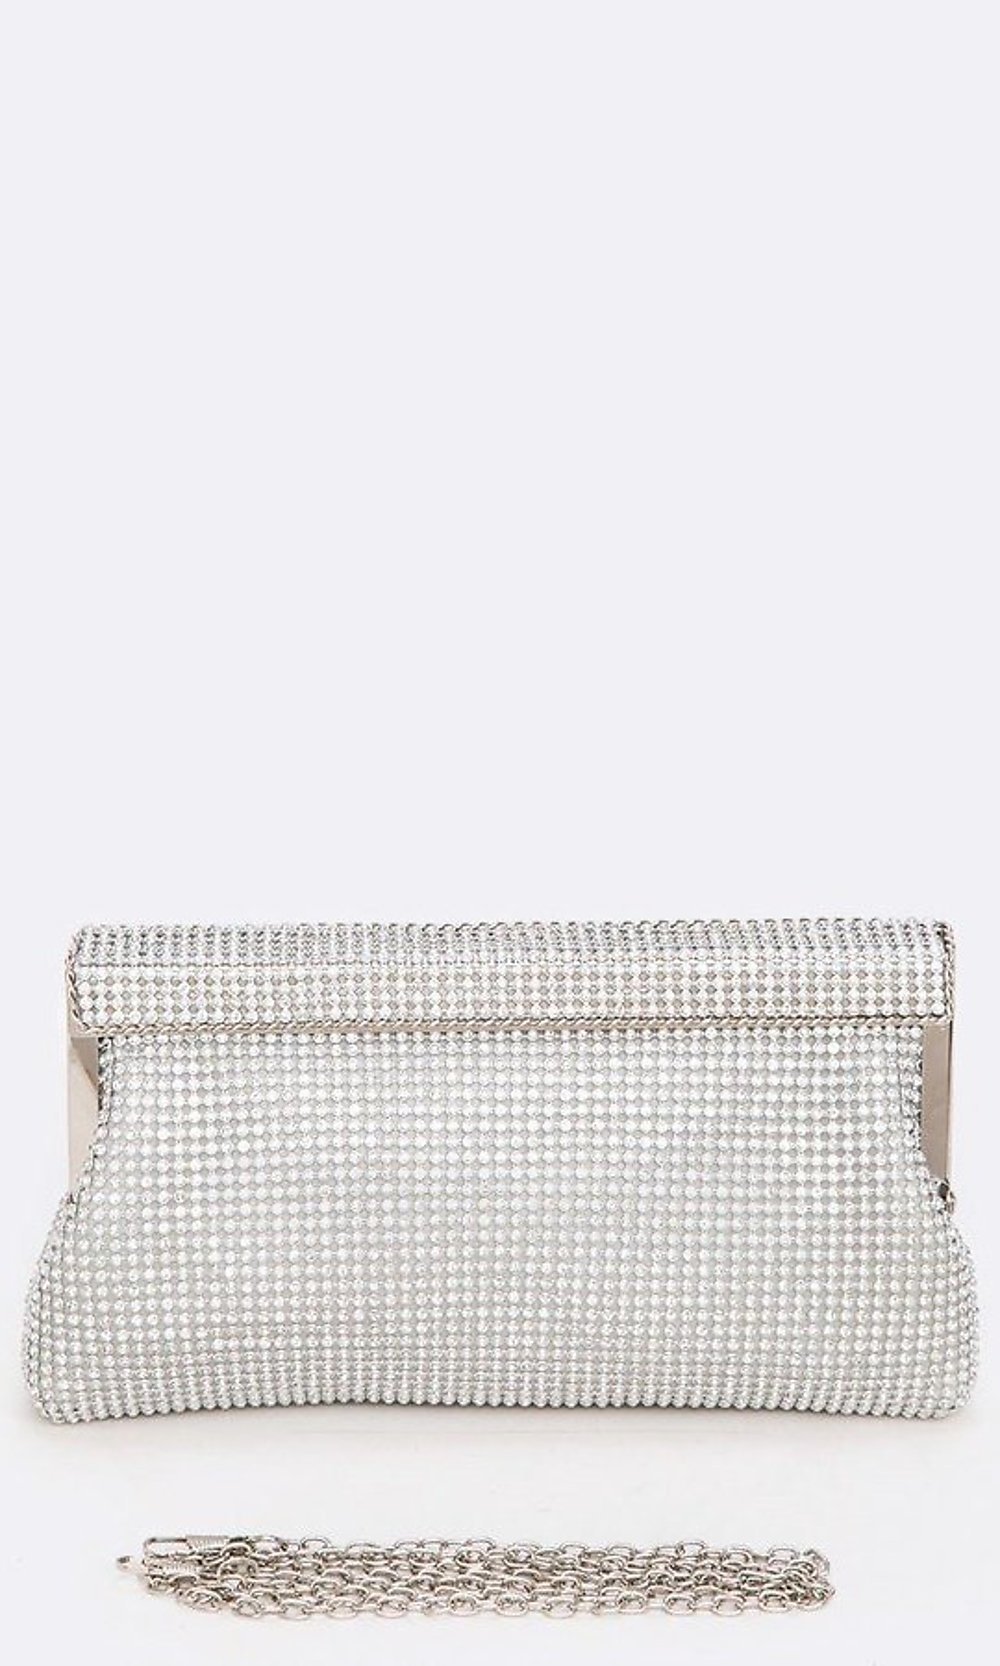 Mesh Soft Clutch Bag with Crystals